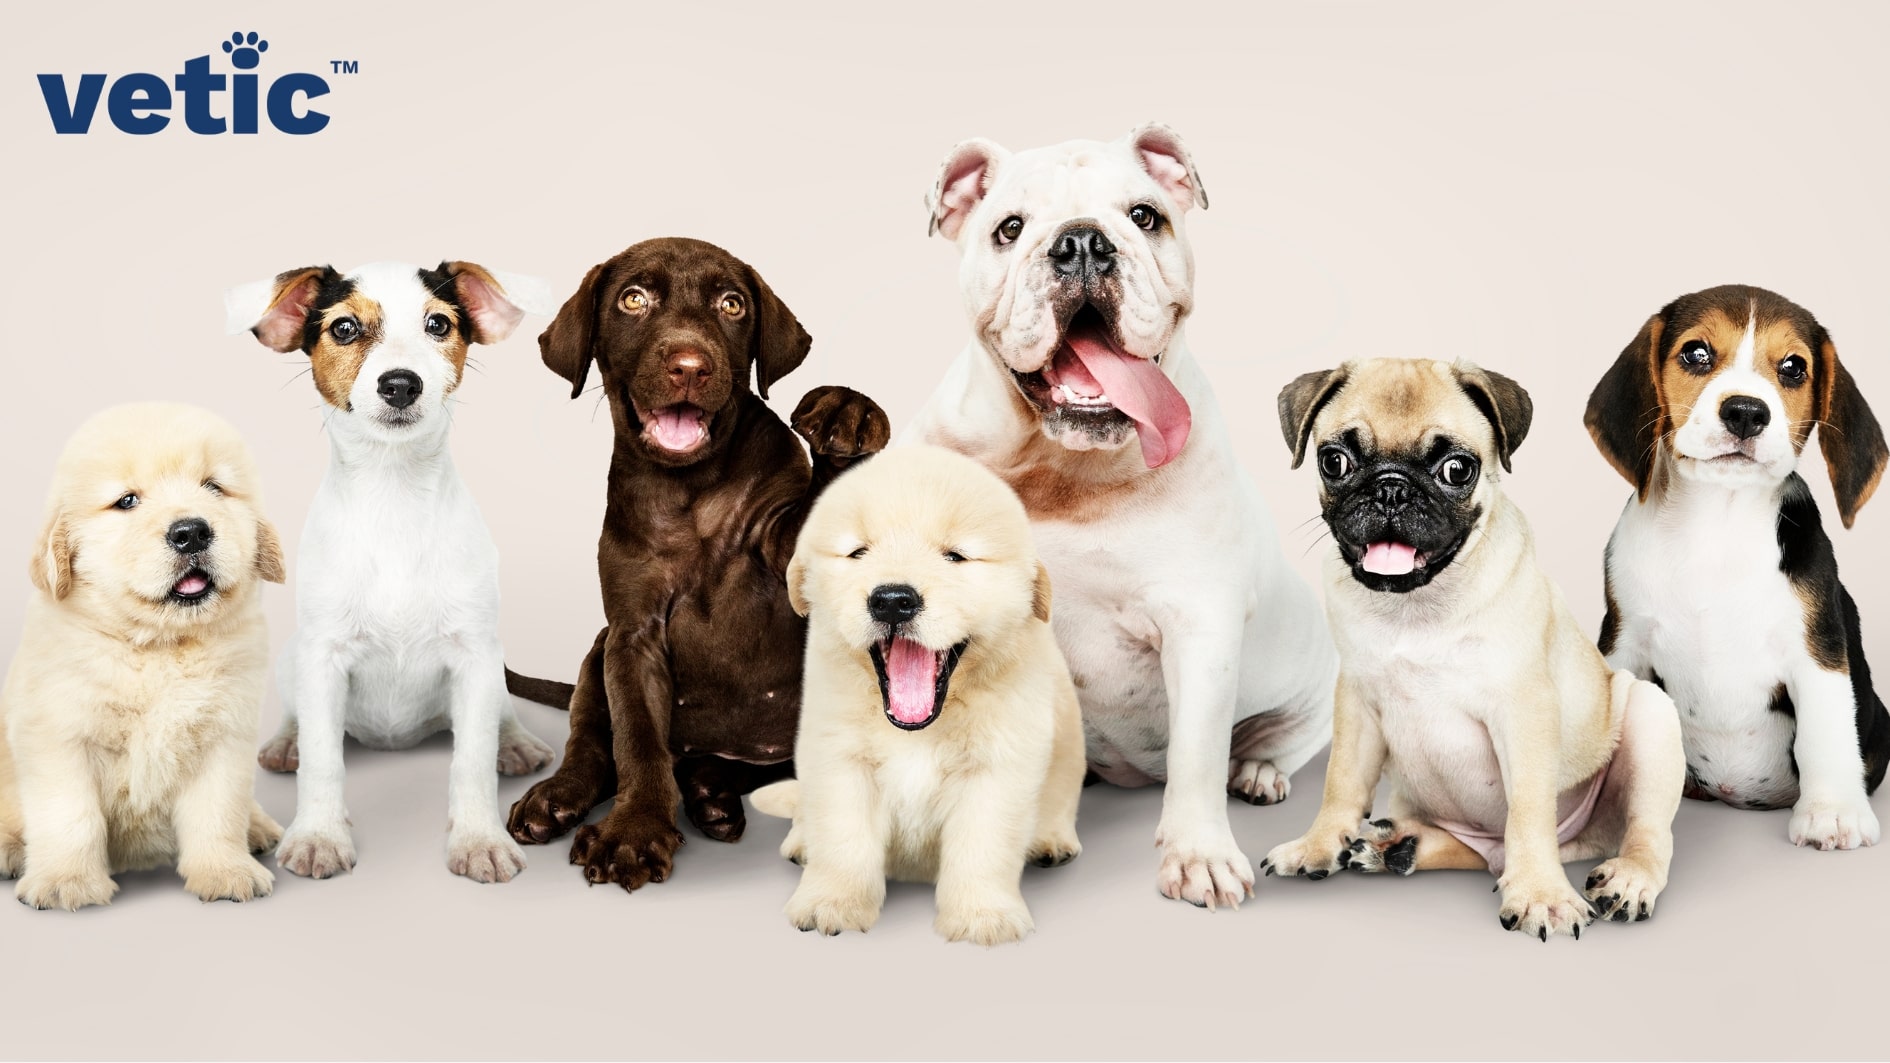 Different breeds of puppies sitting in a line. Breeds include Beagle, Pug, English Bulldog, Golden Retriever, Brown Labrador Retriever, Jack Russell Terrier and another Golden Retriever. Exercising your puppy should depend upon their breed, health and age.